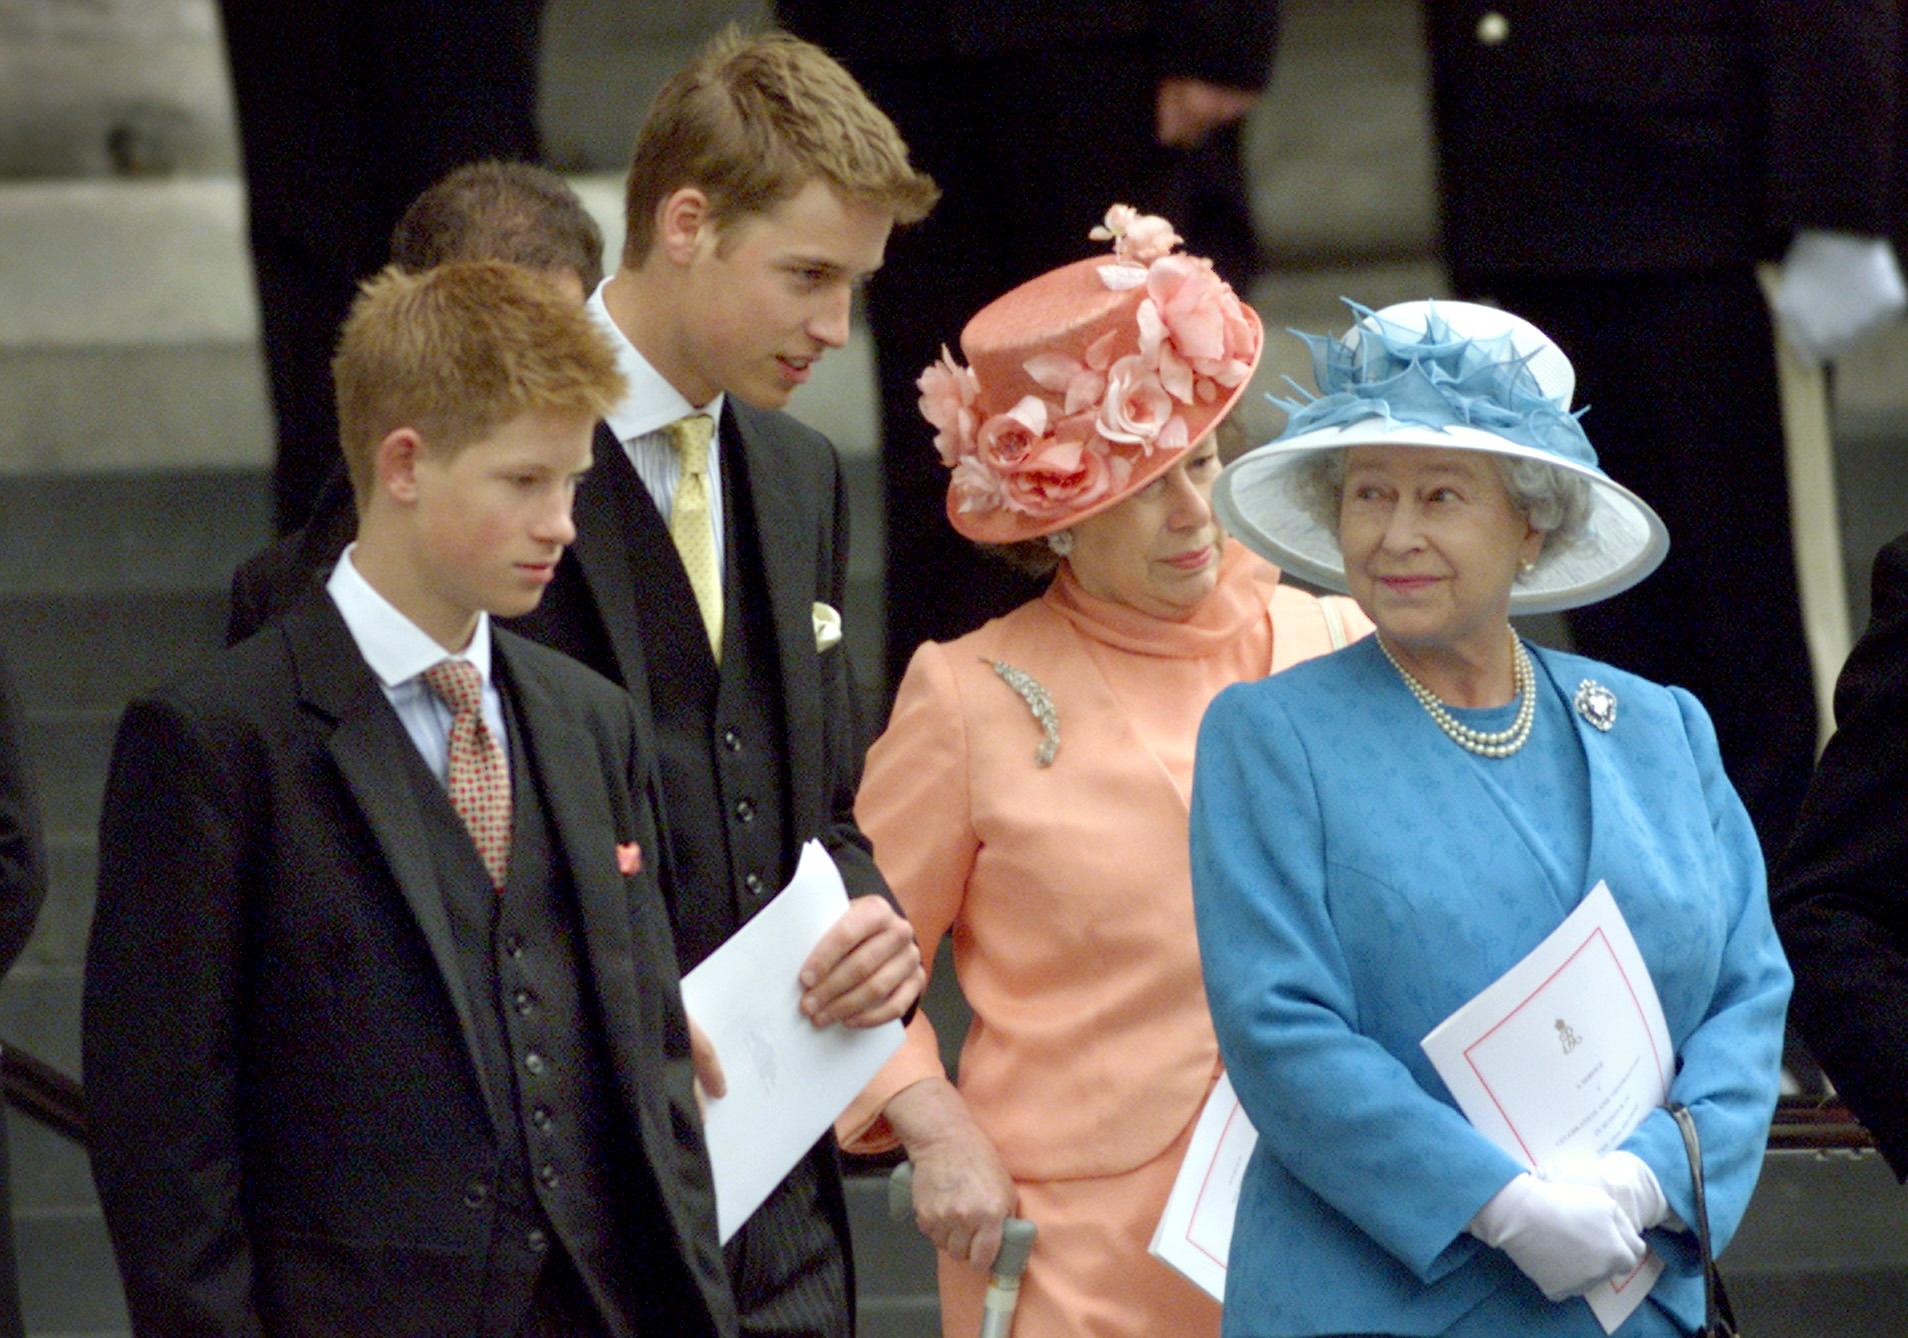 Britain's Queen Elizabeth (R) waits on the steps of St. Paul's Cathedral with her grandsons Prince Harry (L), Prince William (2nd L) and Princess Margaret (2nd R) after attending a national service of thanksgiving in celebration of The Queen Mother's forthcoming 100th birthday in London